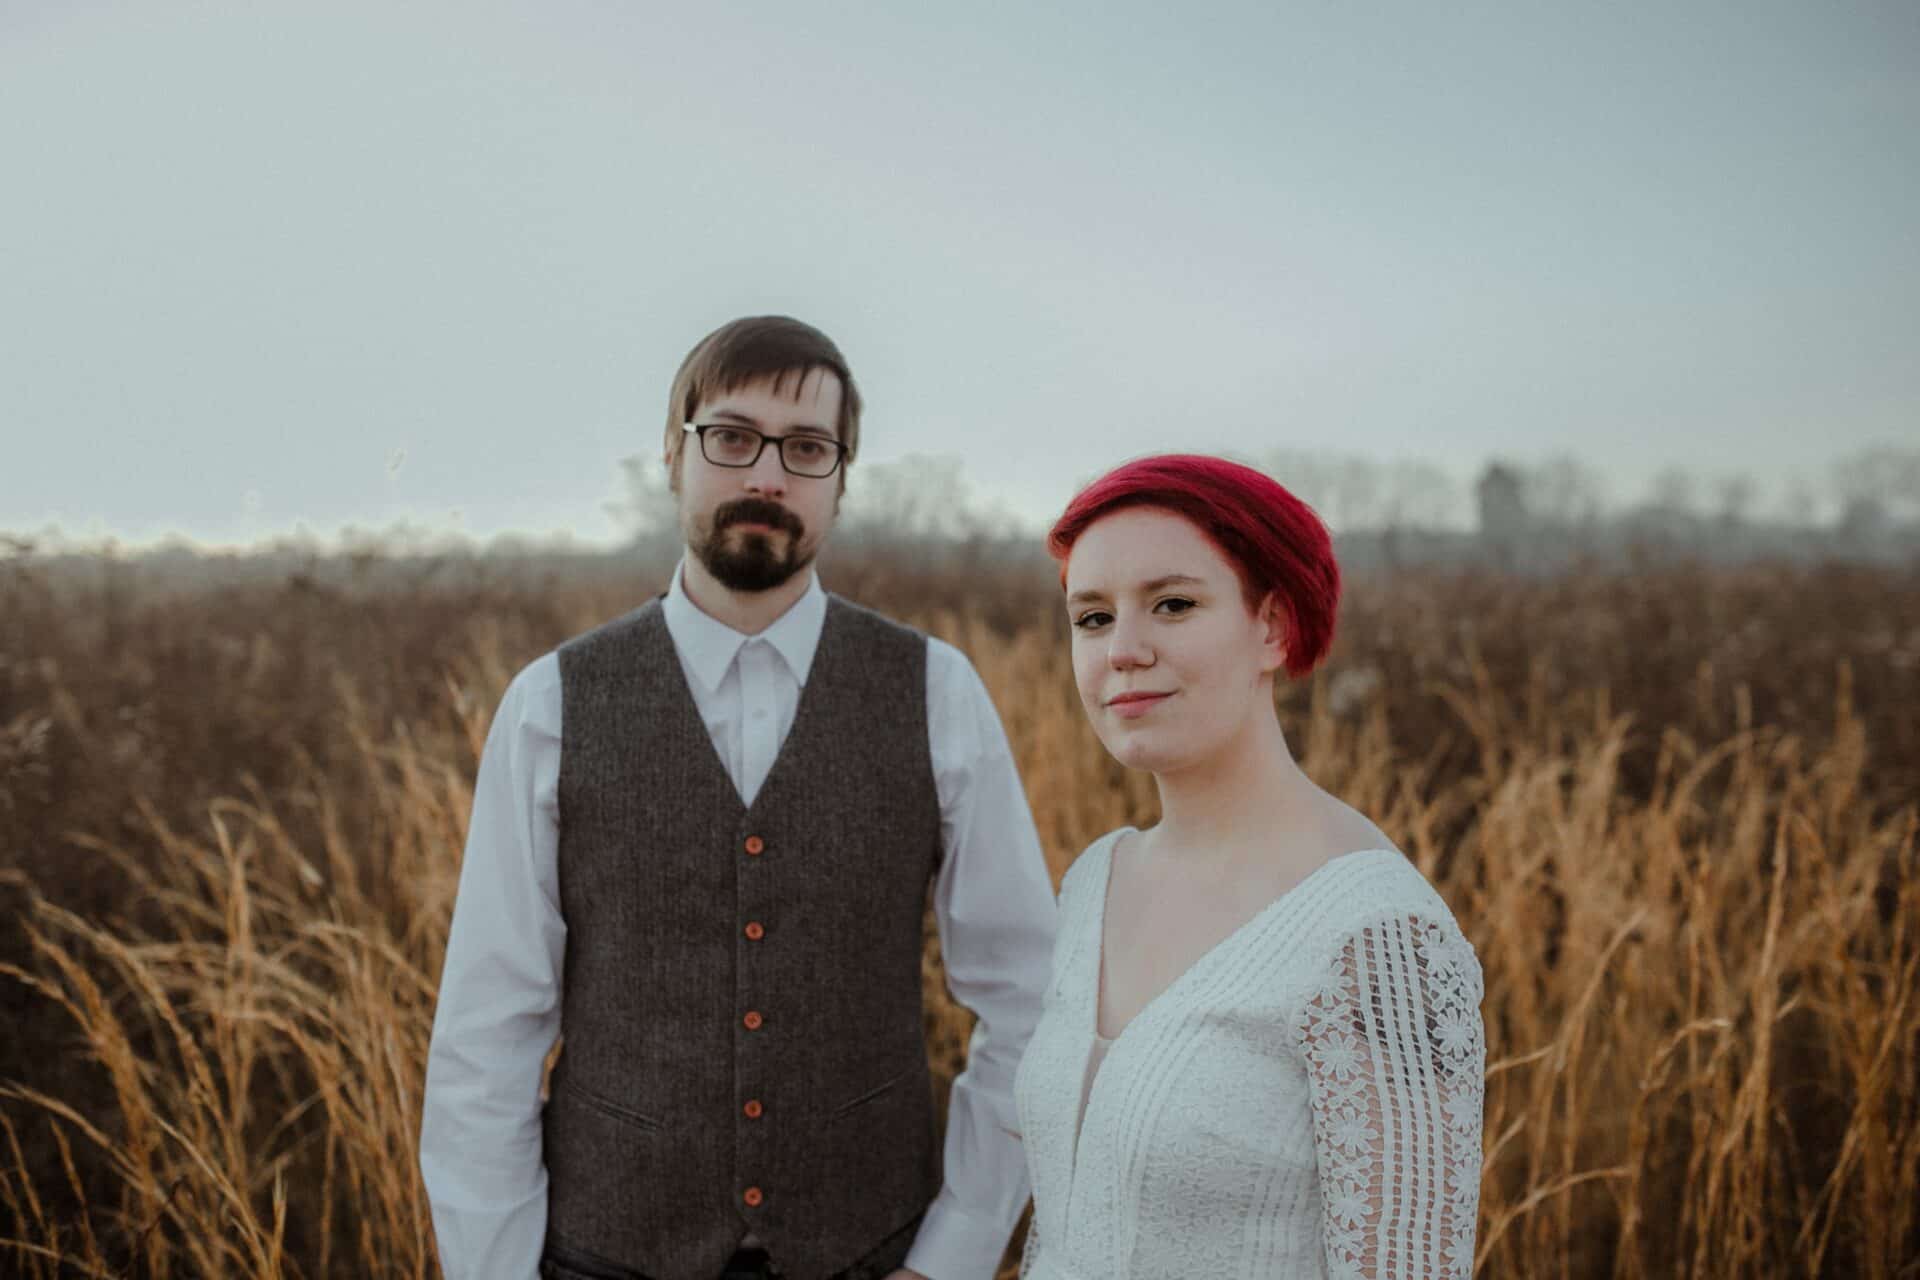 Haunted Like Human, Nick Nace and Sara Jean Kelley, they will be performing @ the Mockingbird Theater in downtown Franklin.